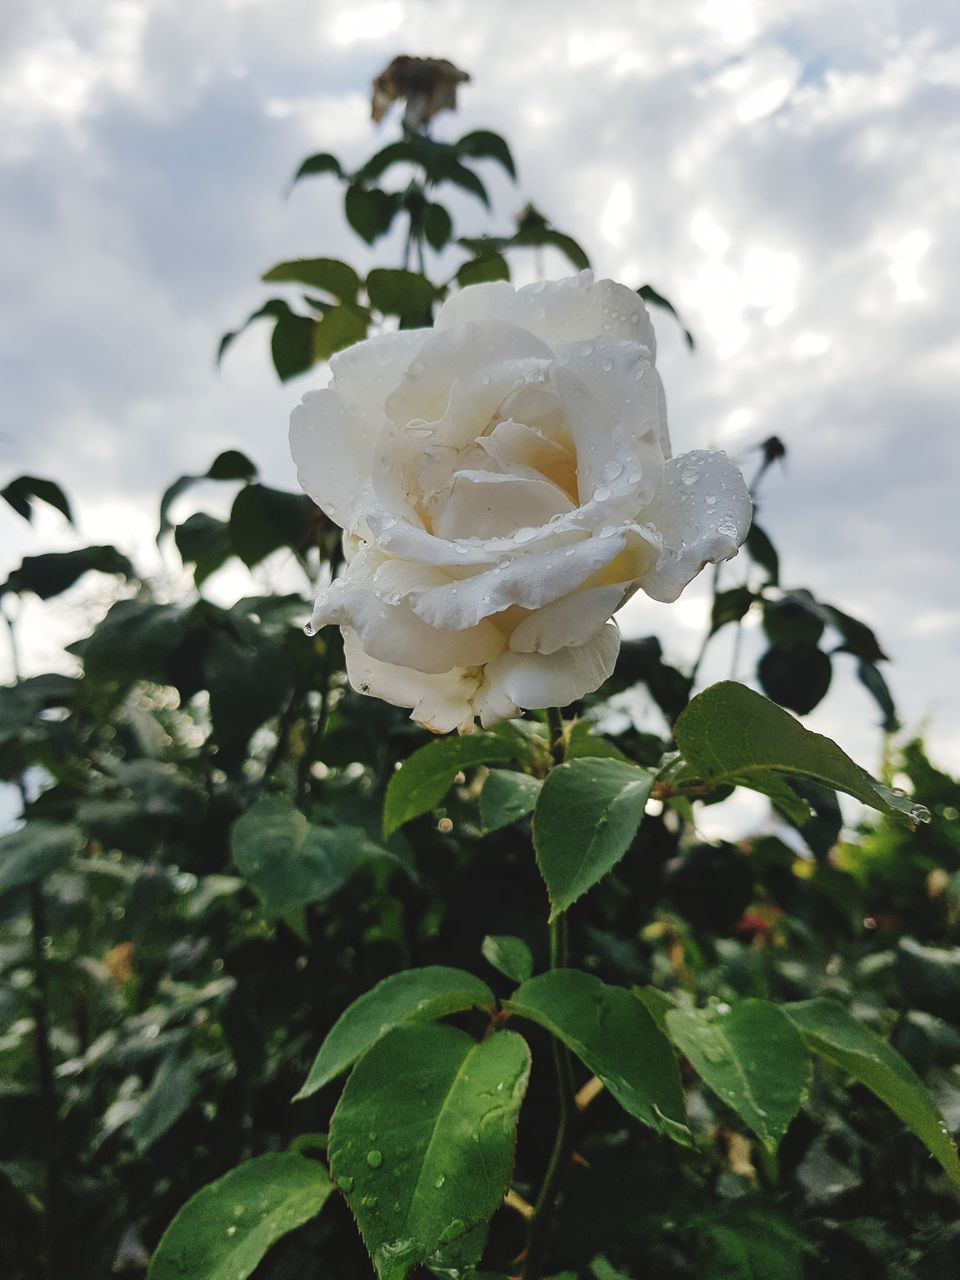 plant, beauty in nature, flowering plant, growth, flower, vulnerability, petal, plant part, flower head, inflorescence, freshness, fragility, leaf, close-up, nature, white color, focus on foreground, rose, day, no people, outdoors